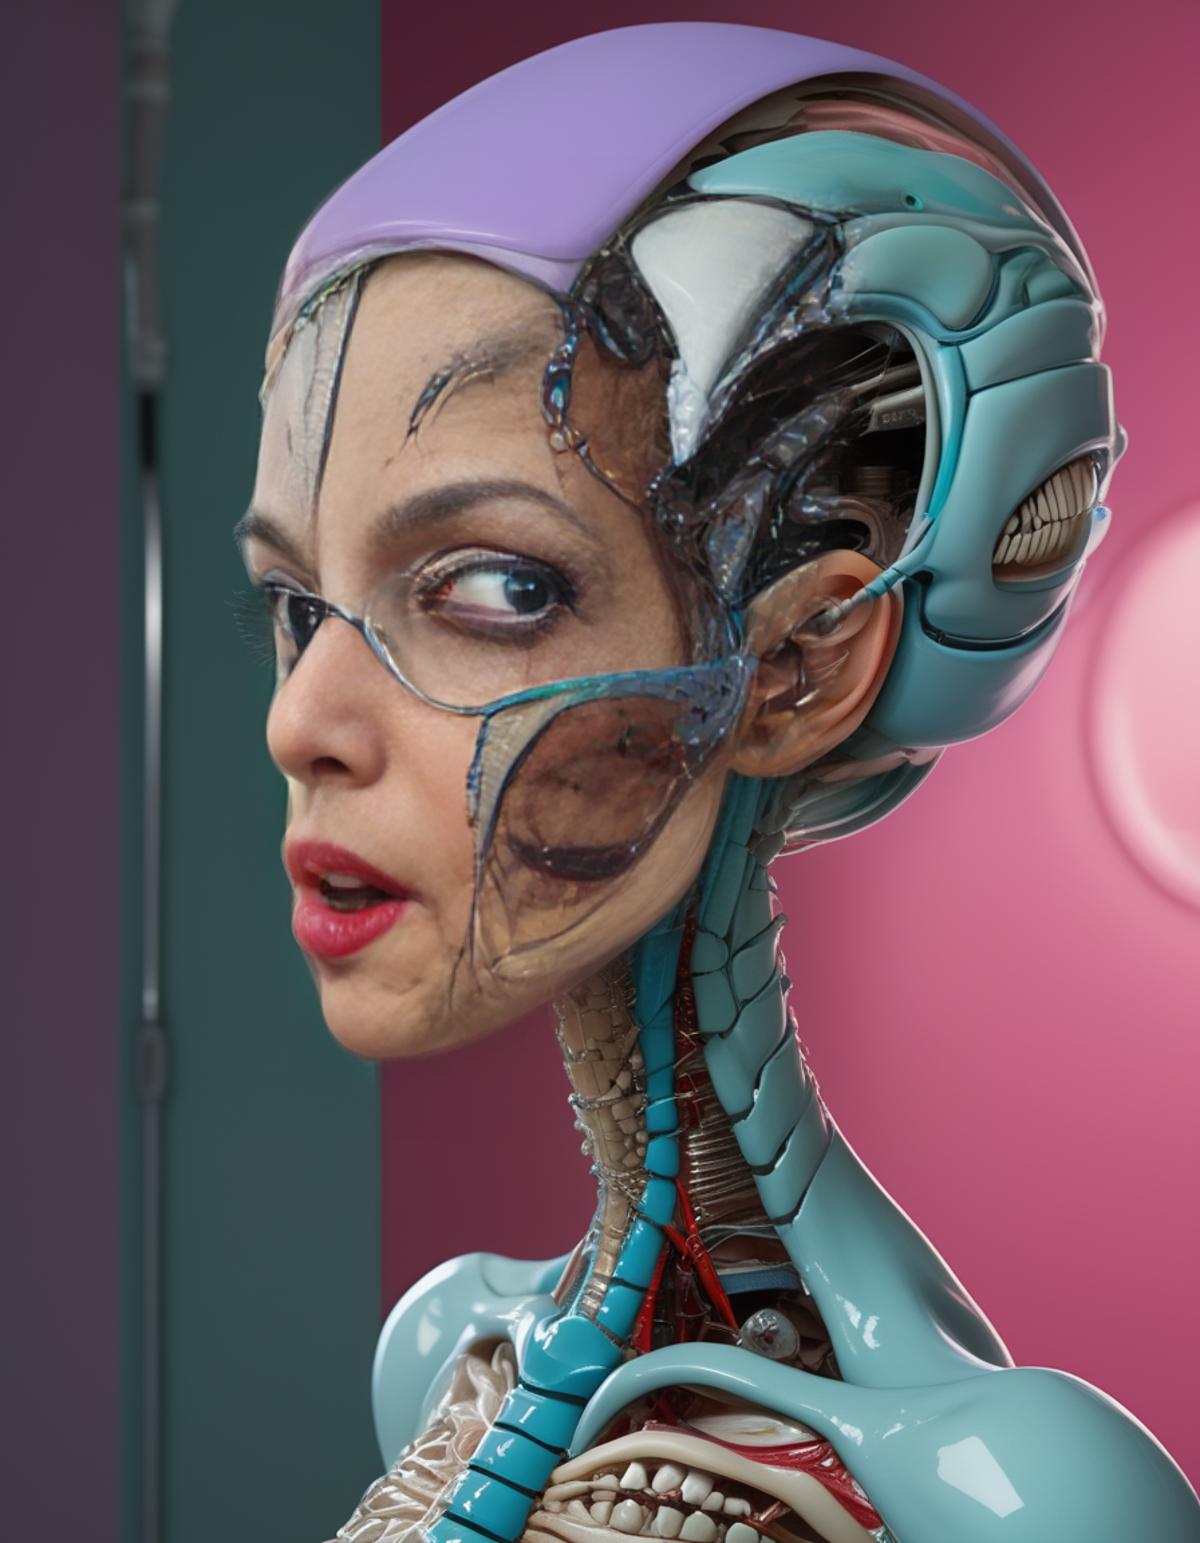 AI model image by Bytor1966